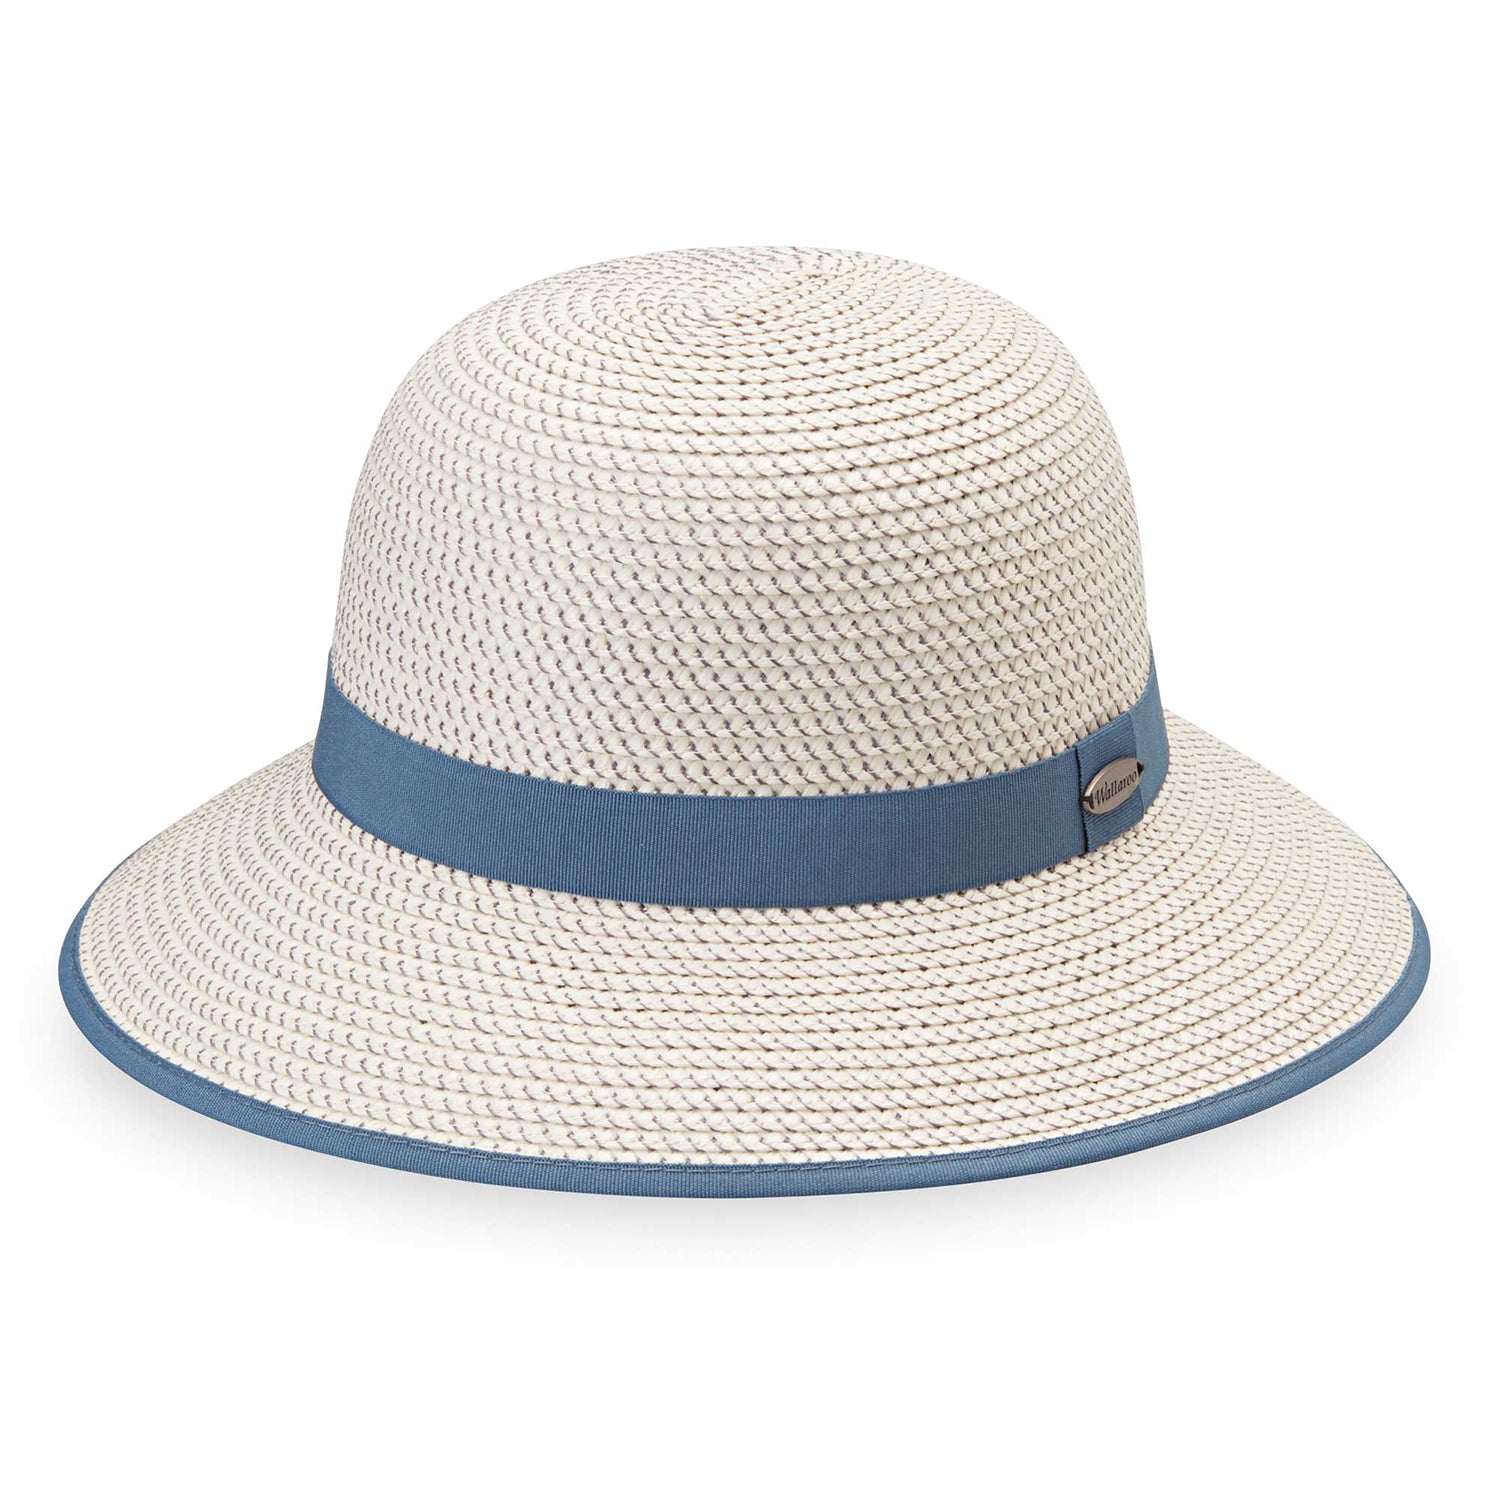 Featuring Wallaroo Bucket style hat for women made with packable, UPF 50 material